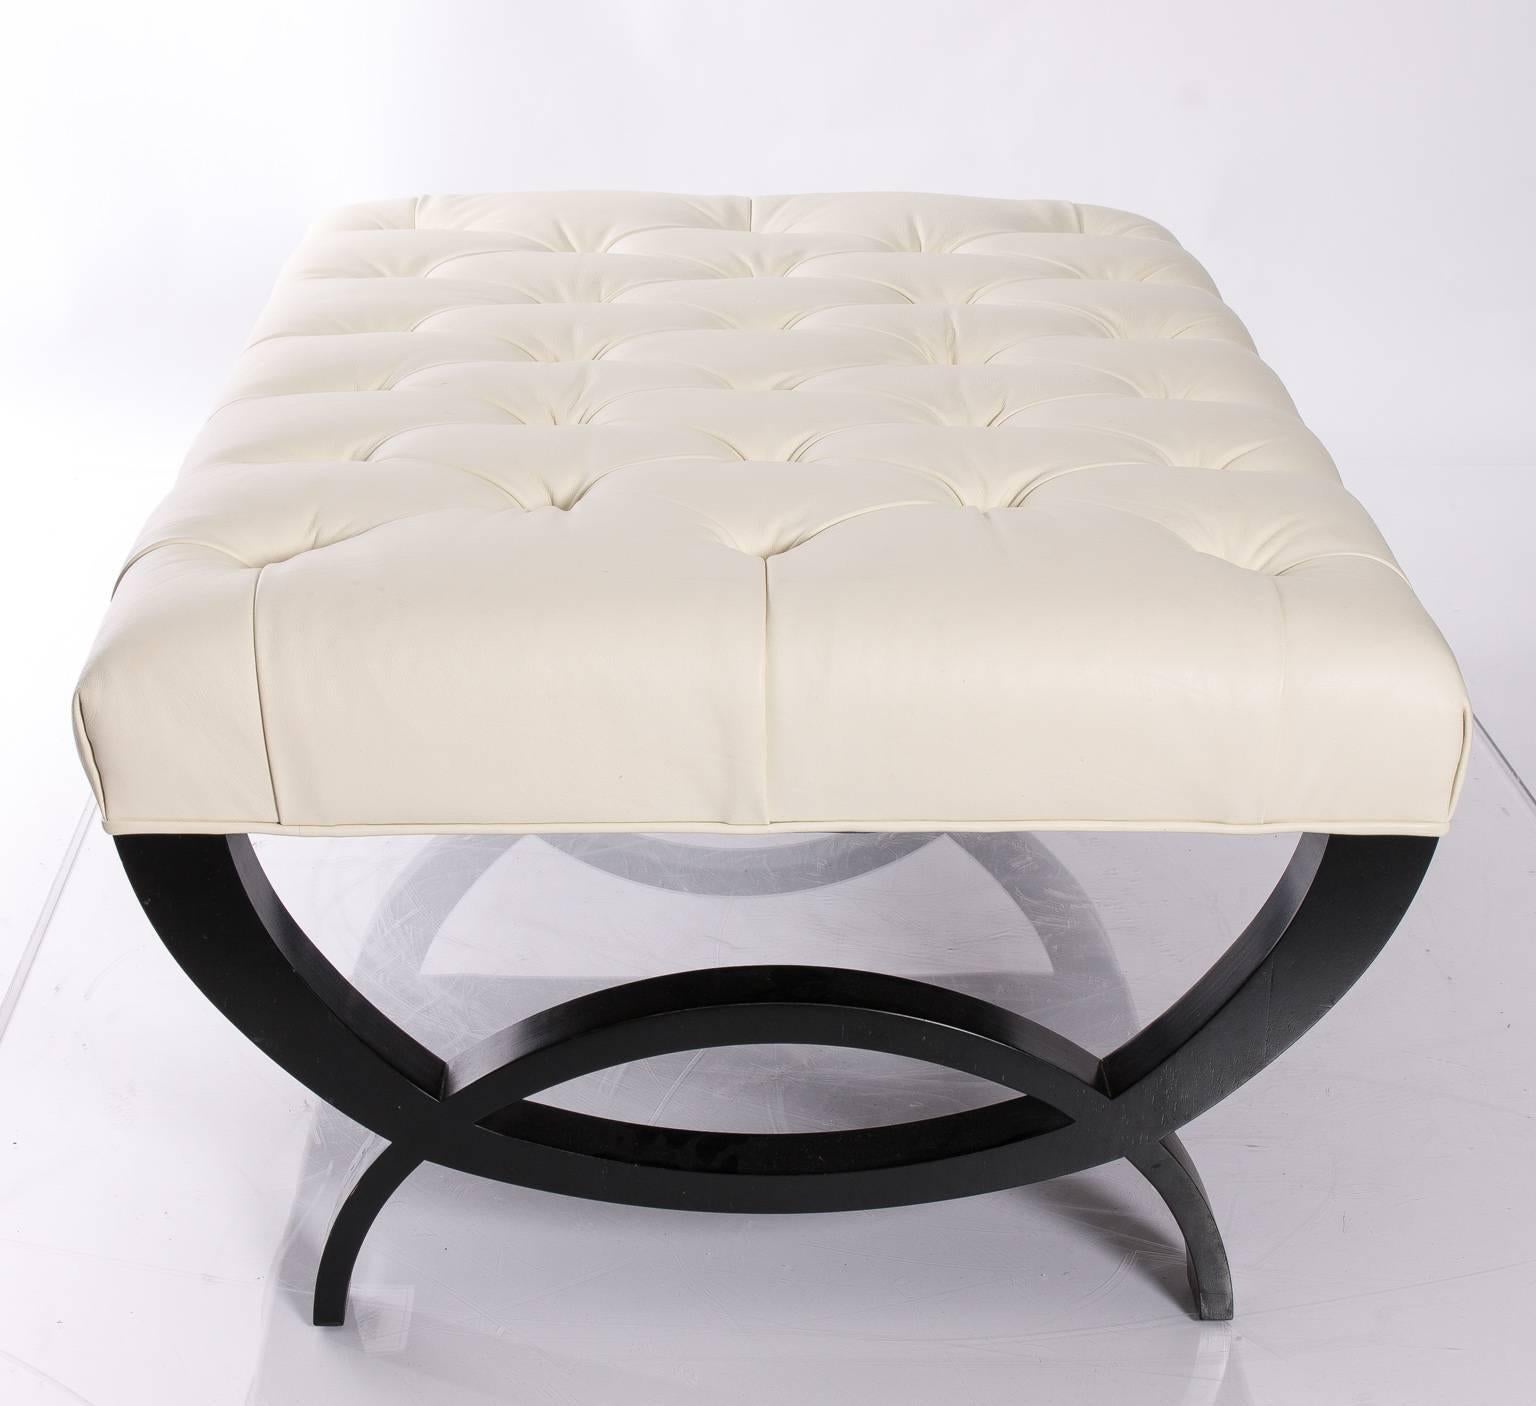 20th Century Tufted Leather Baker Ottoman